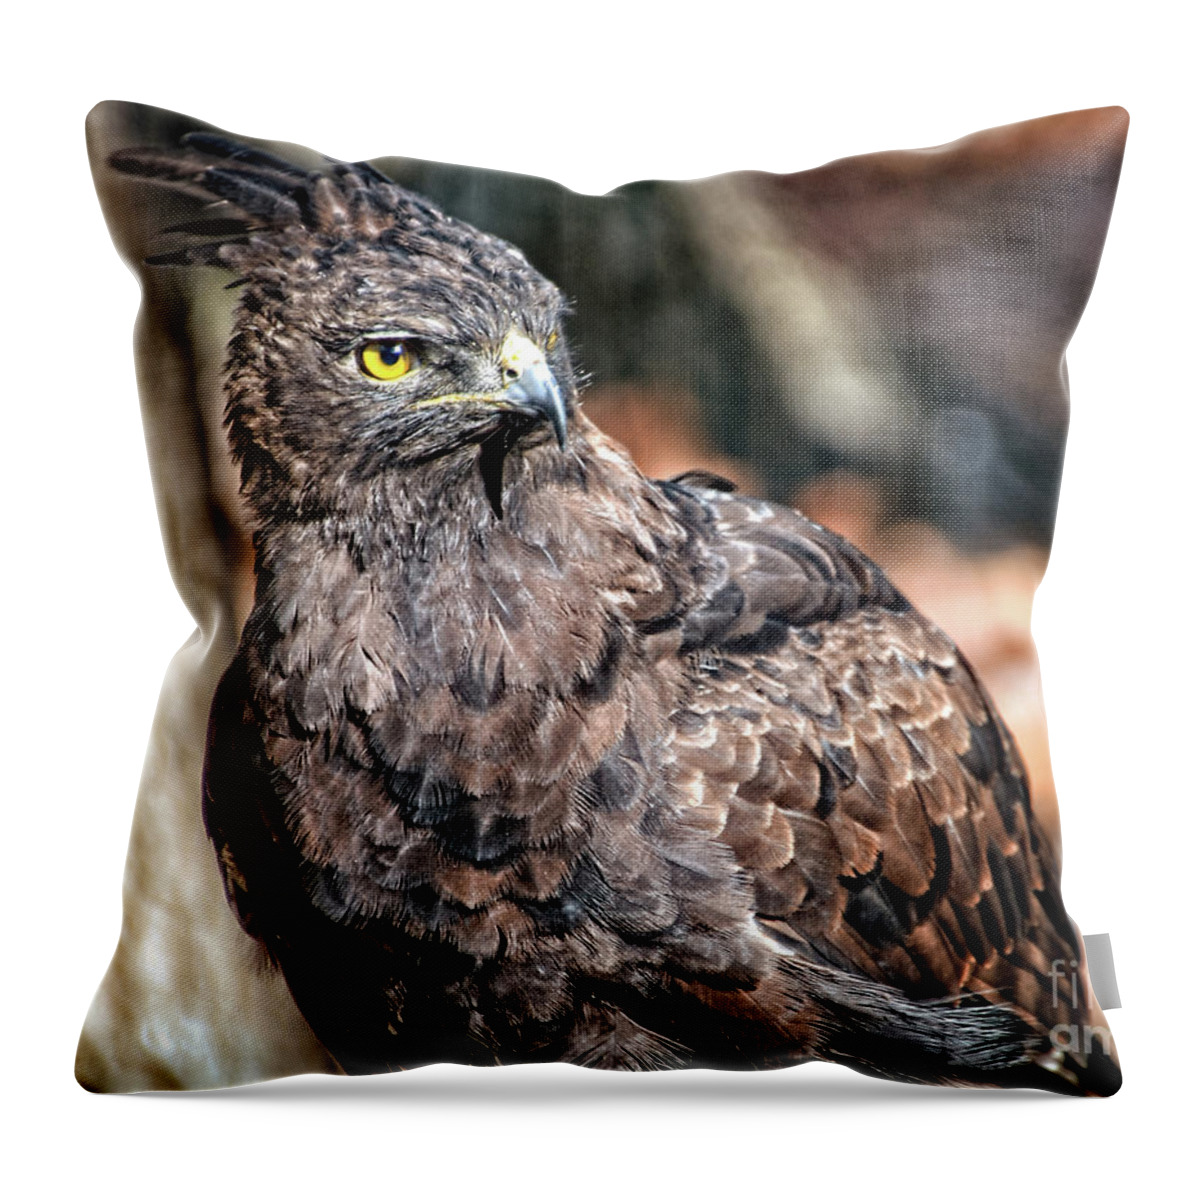 Bird Throw Pillow featuring the photograph Accipitridae by Tom Watkins PVminer pixs